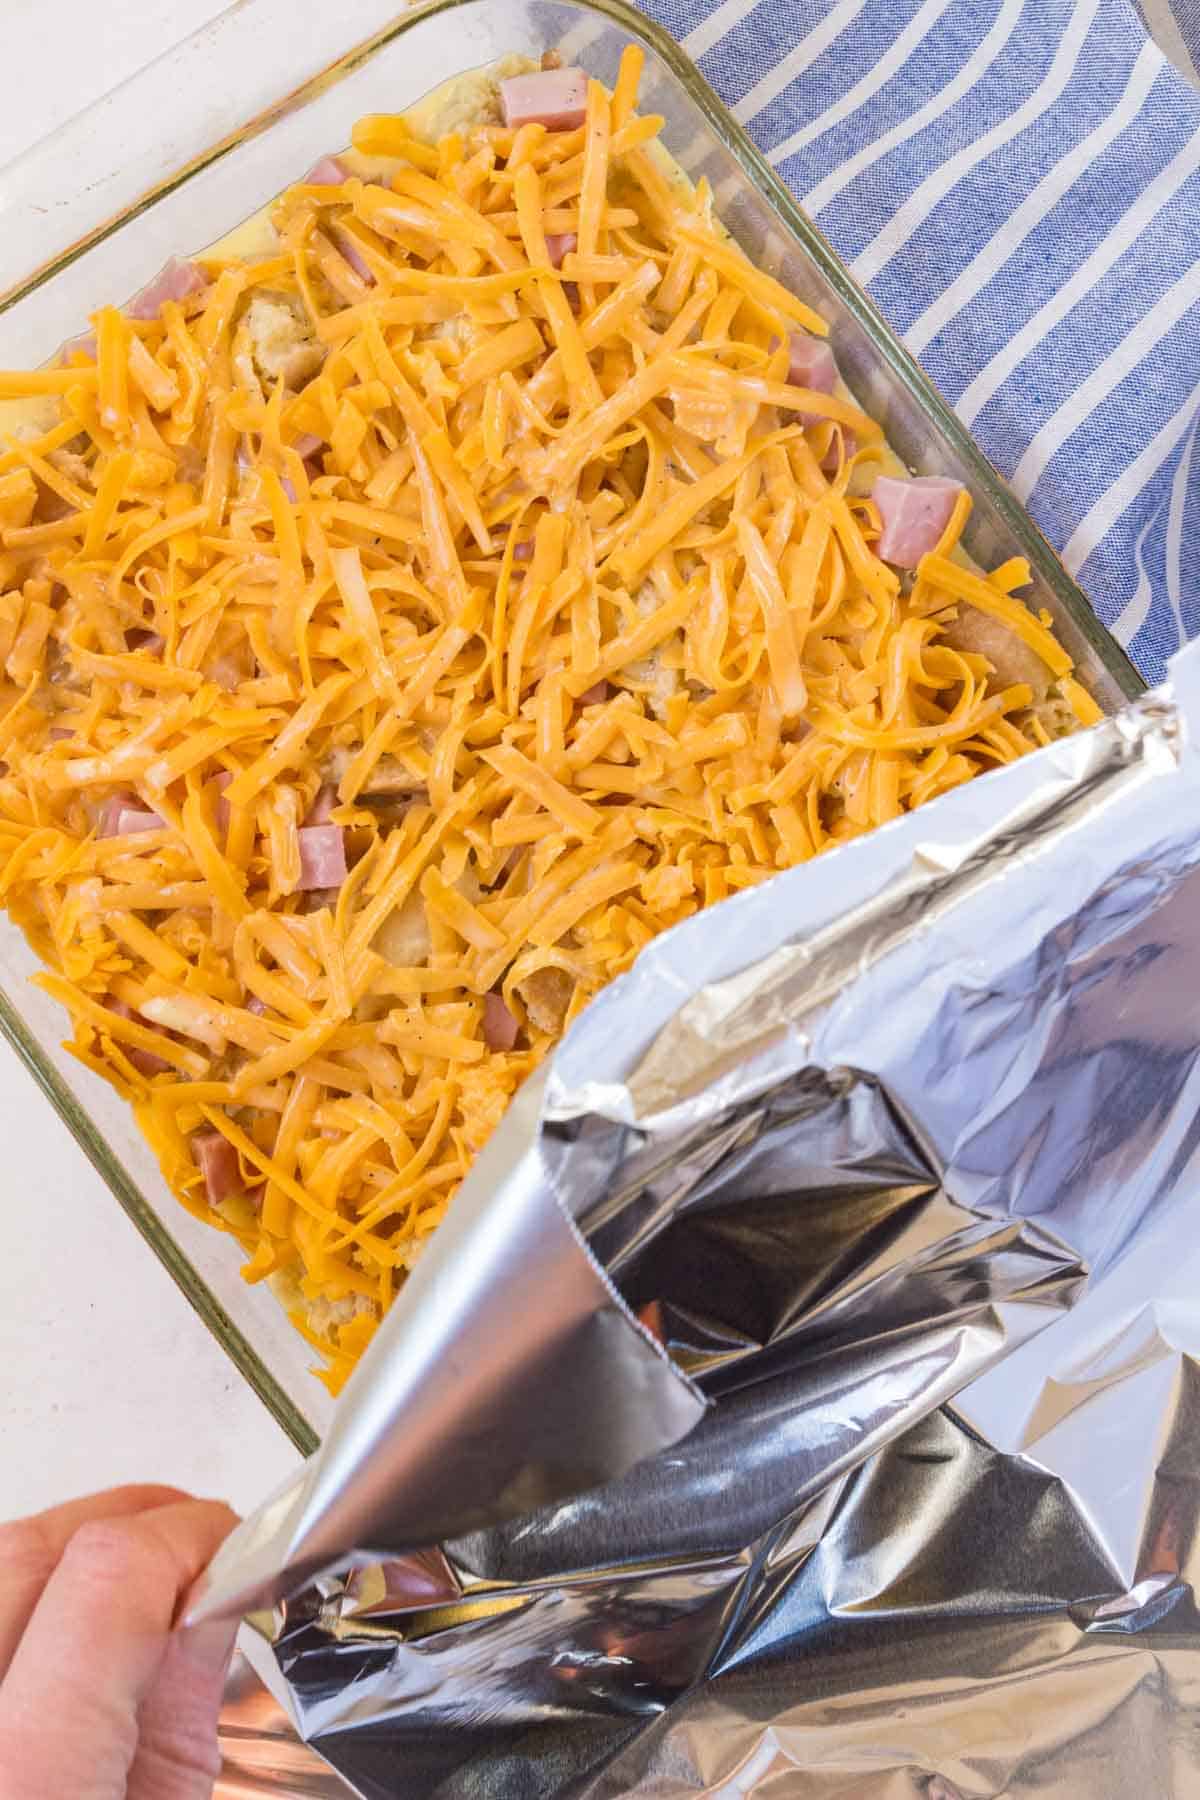 Foil is placed over an unbaked gluten free ham and cheese strata.